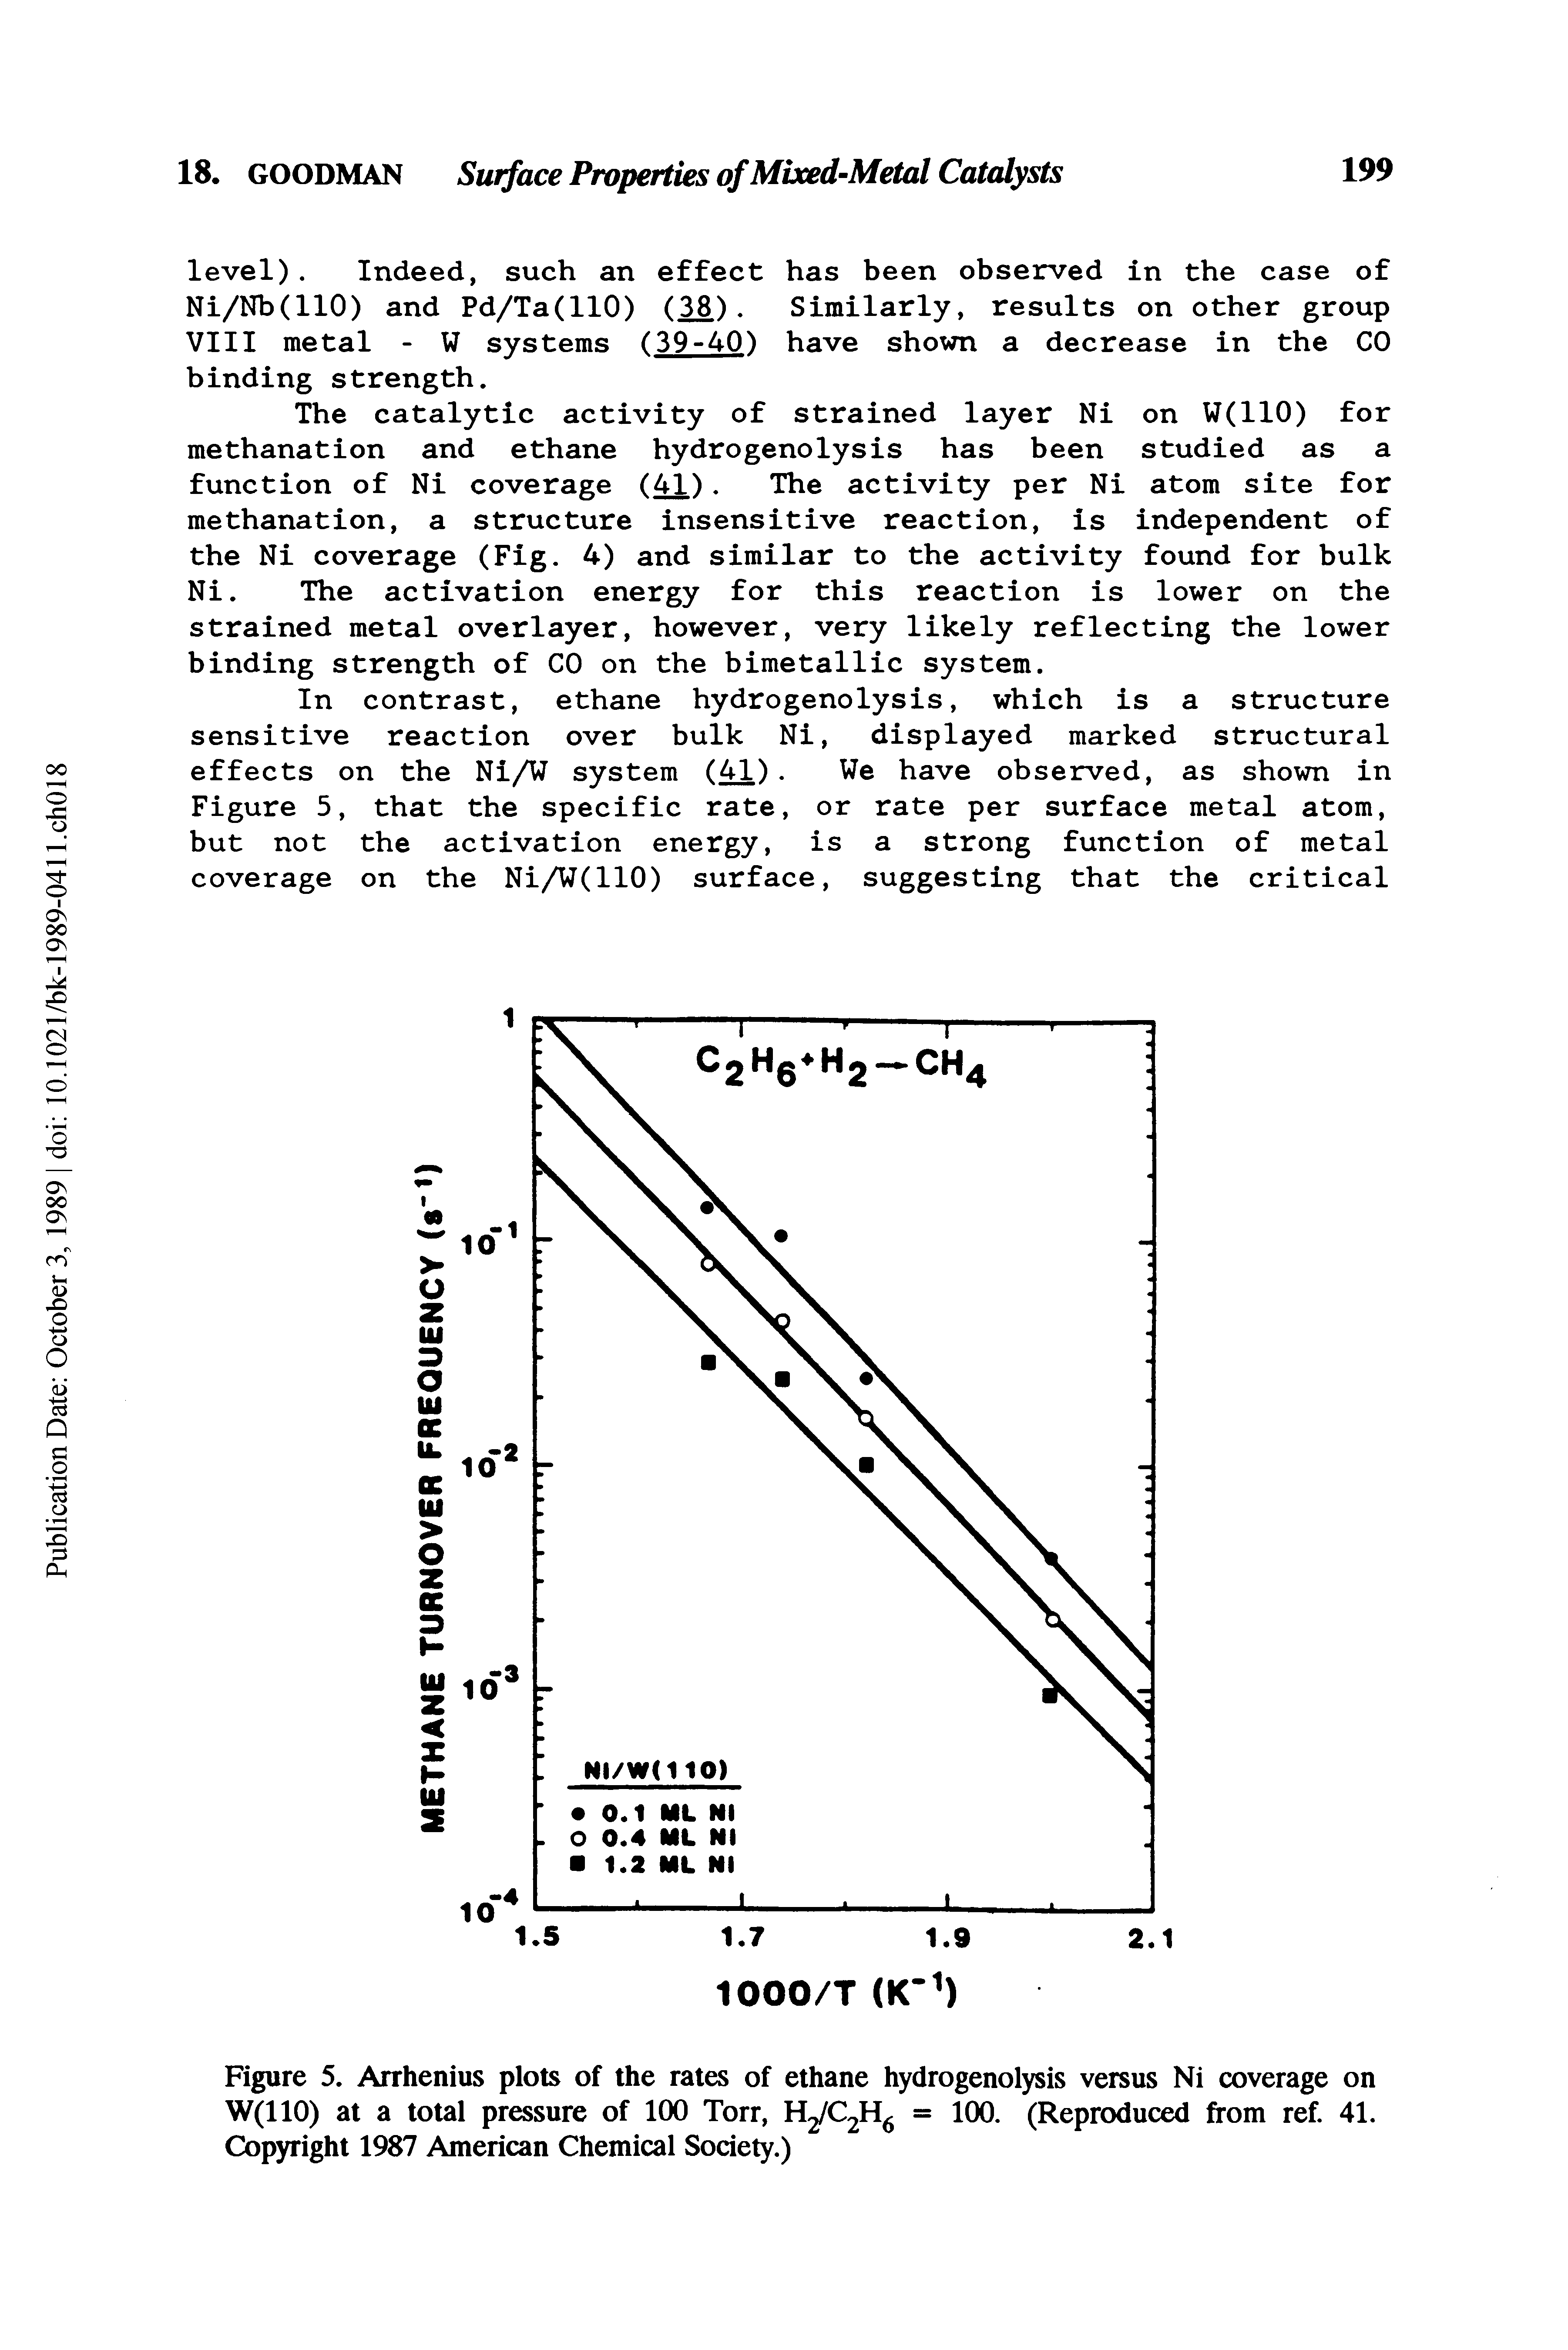 Figure 5. Arrhenius plots of the rates of ethane hydrogenolysis versus Ni coverage on W(110) at a total pressure of 100 Torr, H2/C2H6 = 100. (Reproduced from ref. 41. Copyright 1987 American Chemical Society.)...